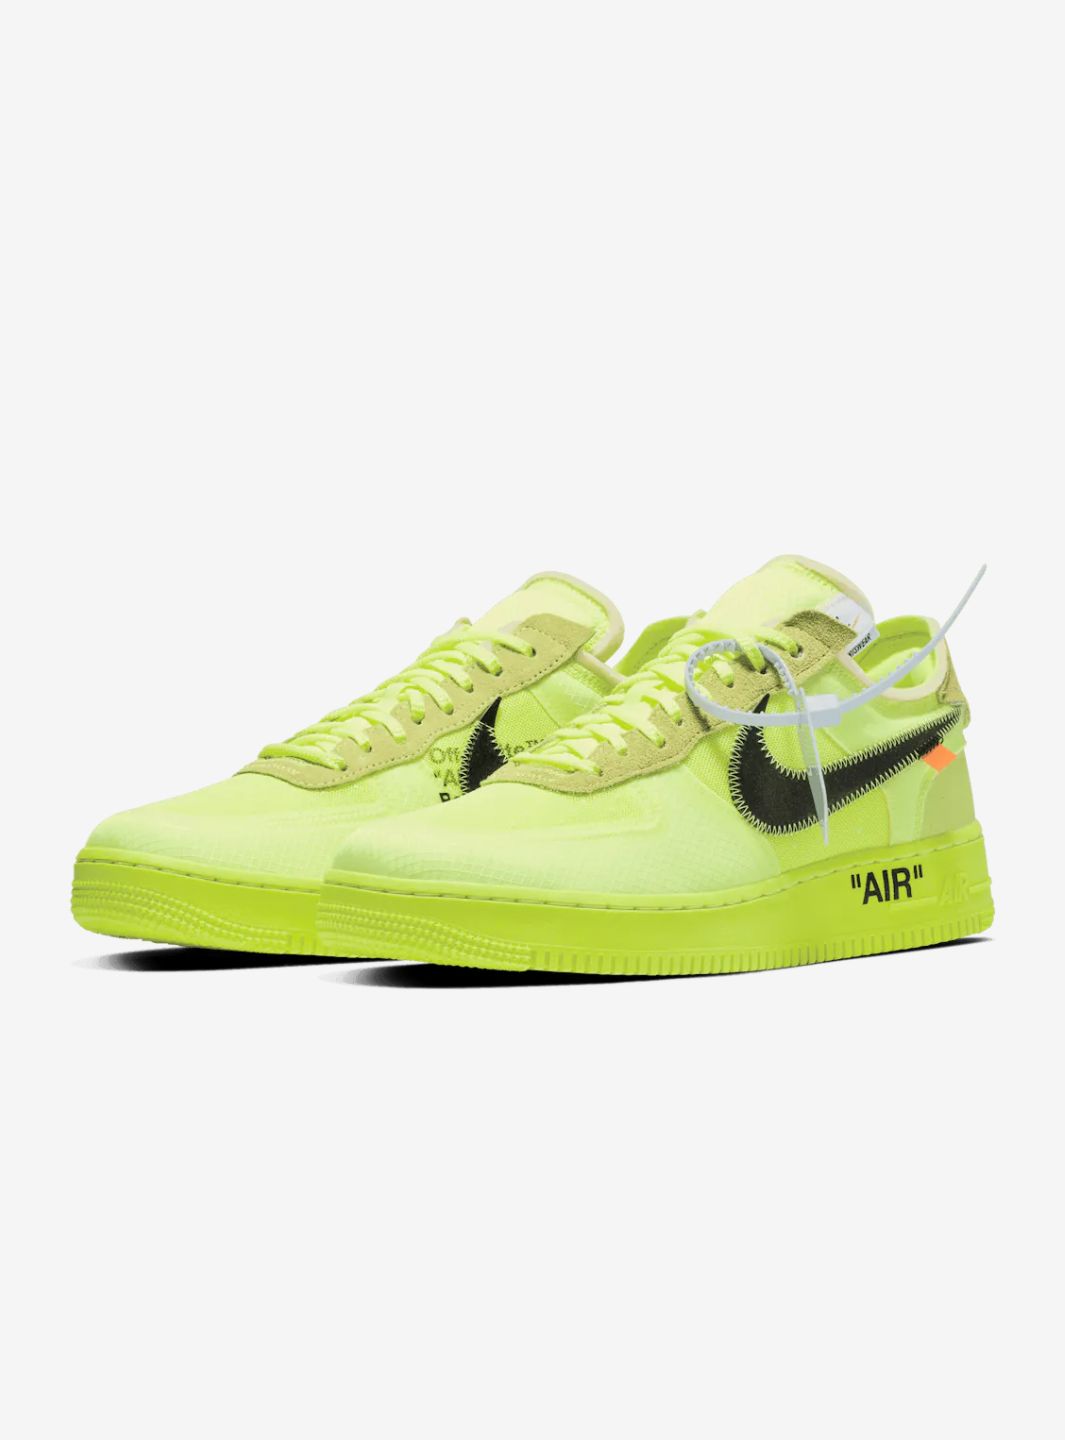 Nike Air Force 1 Low Off-White Volt - AO4606-700 | ResellZone